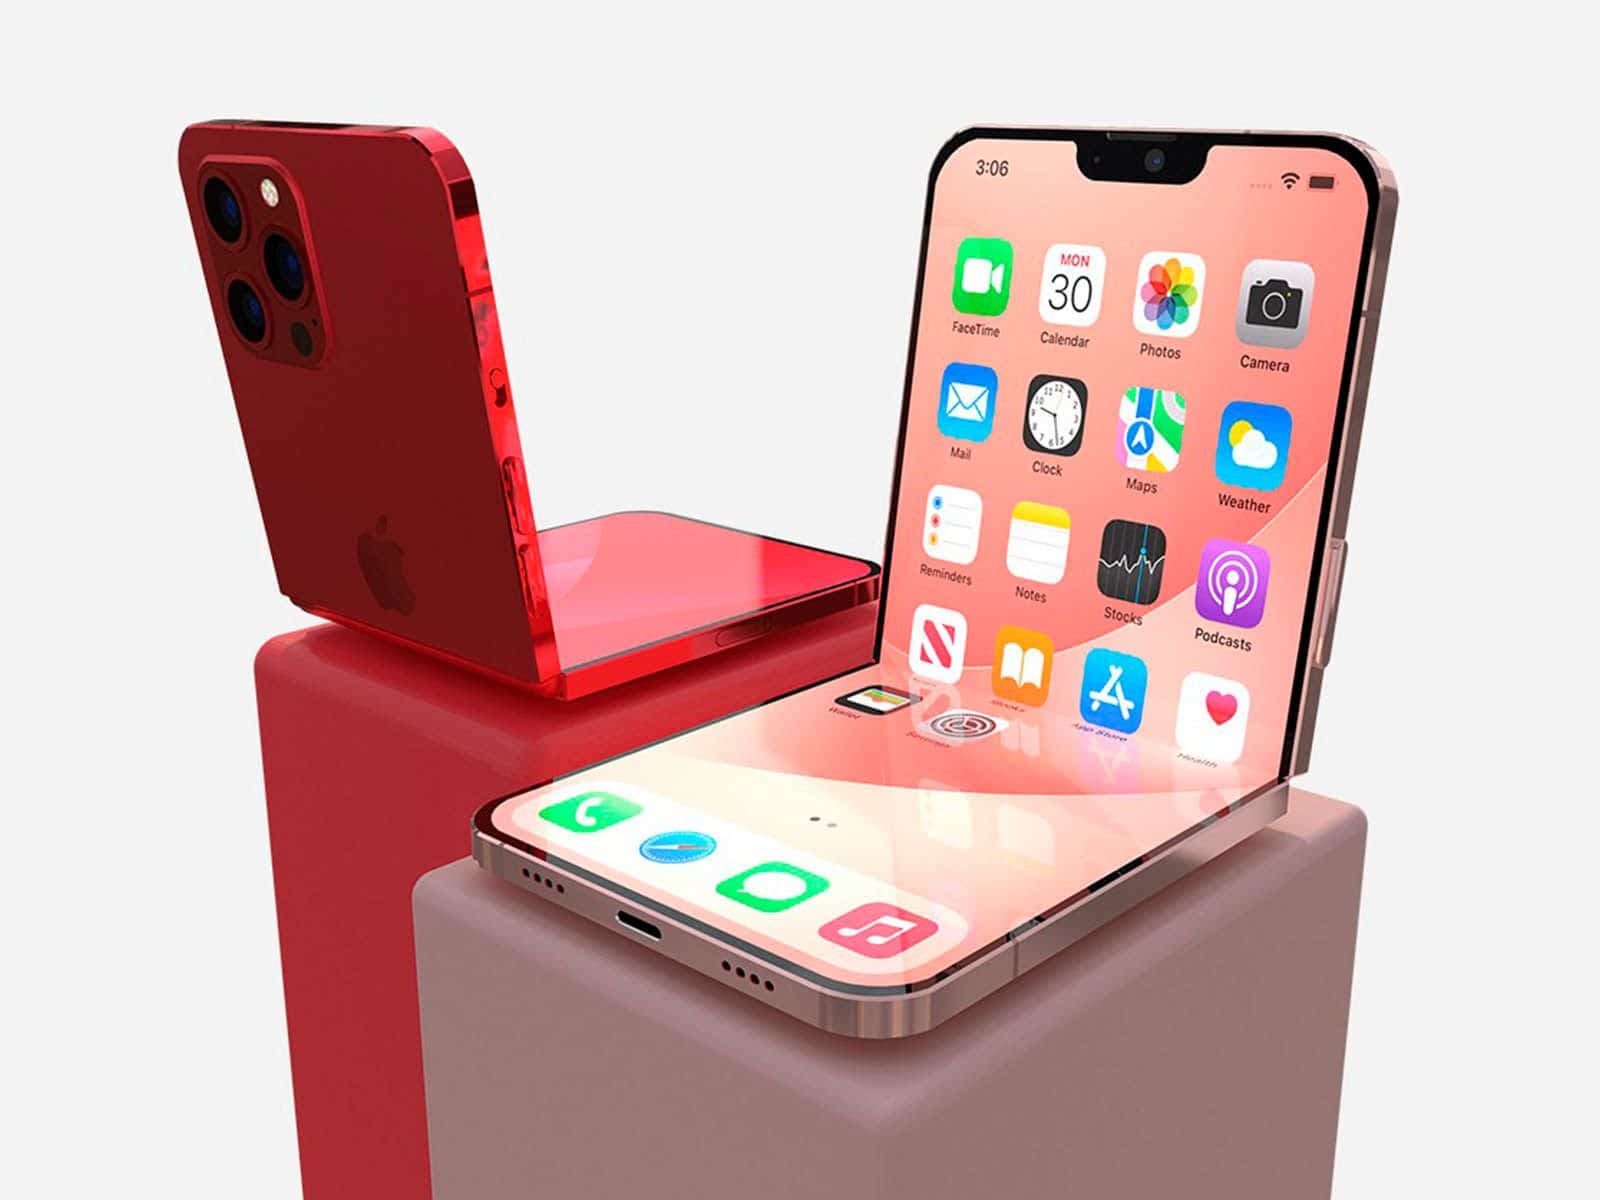 Apple’s foldable iPhone could arrive in 2025